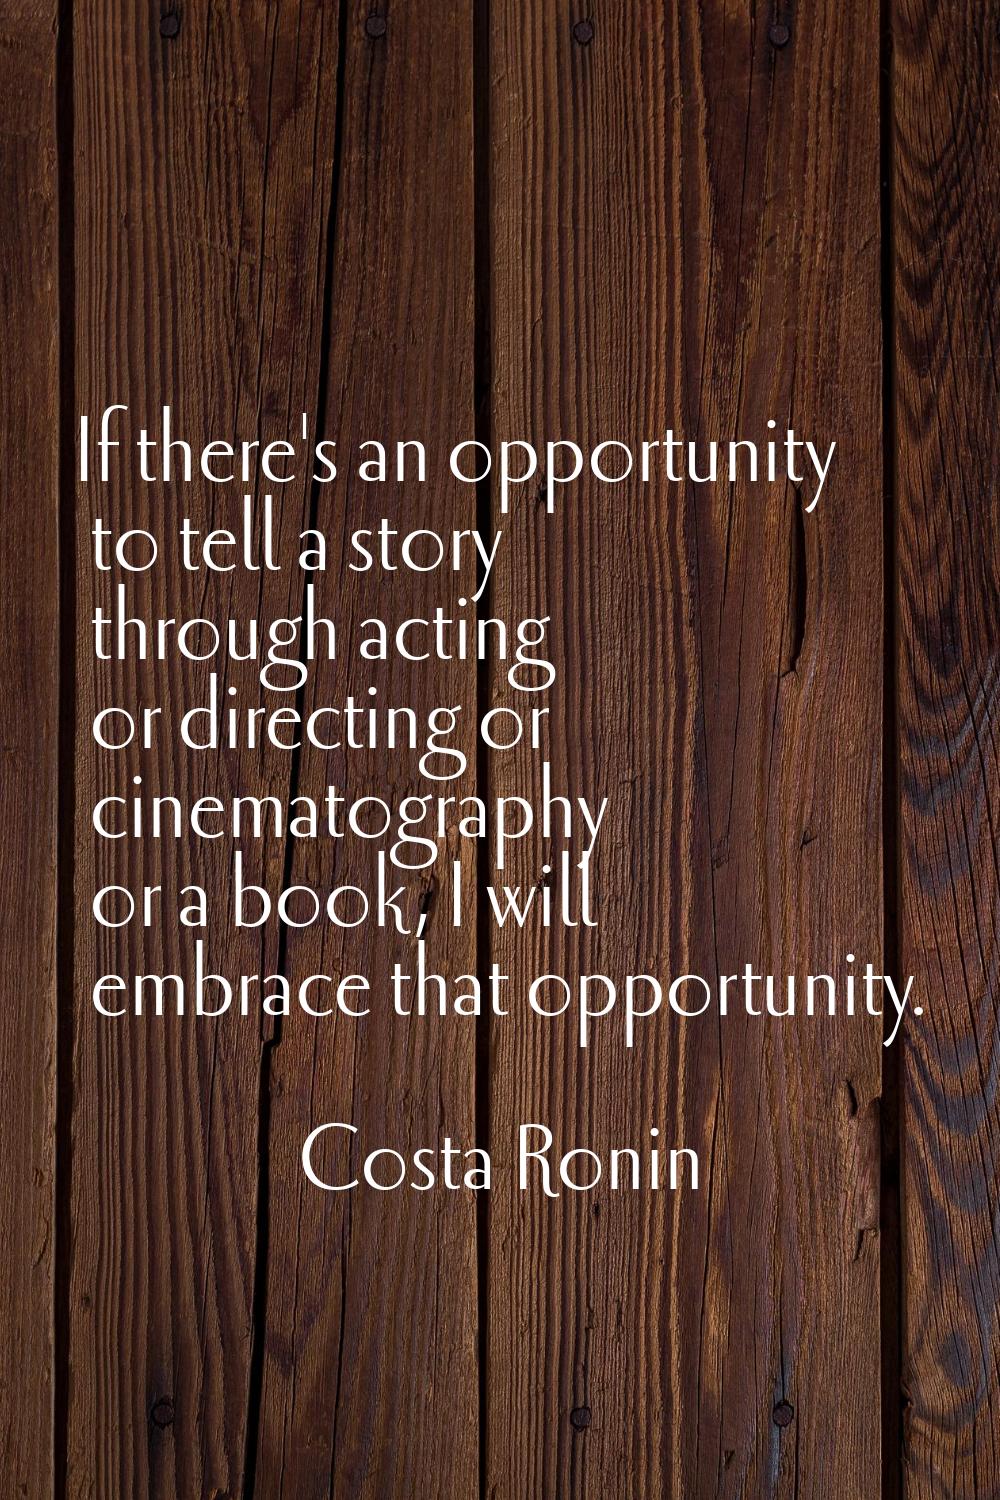 If there's an opportunity to tell a story through acting or directing or cinematography or a book, 